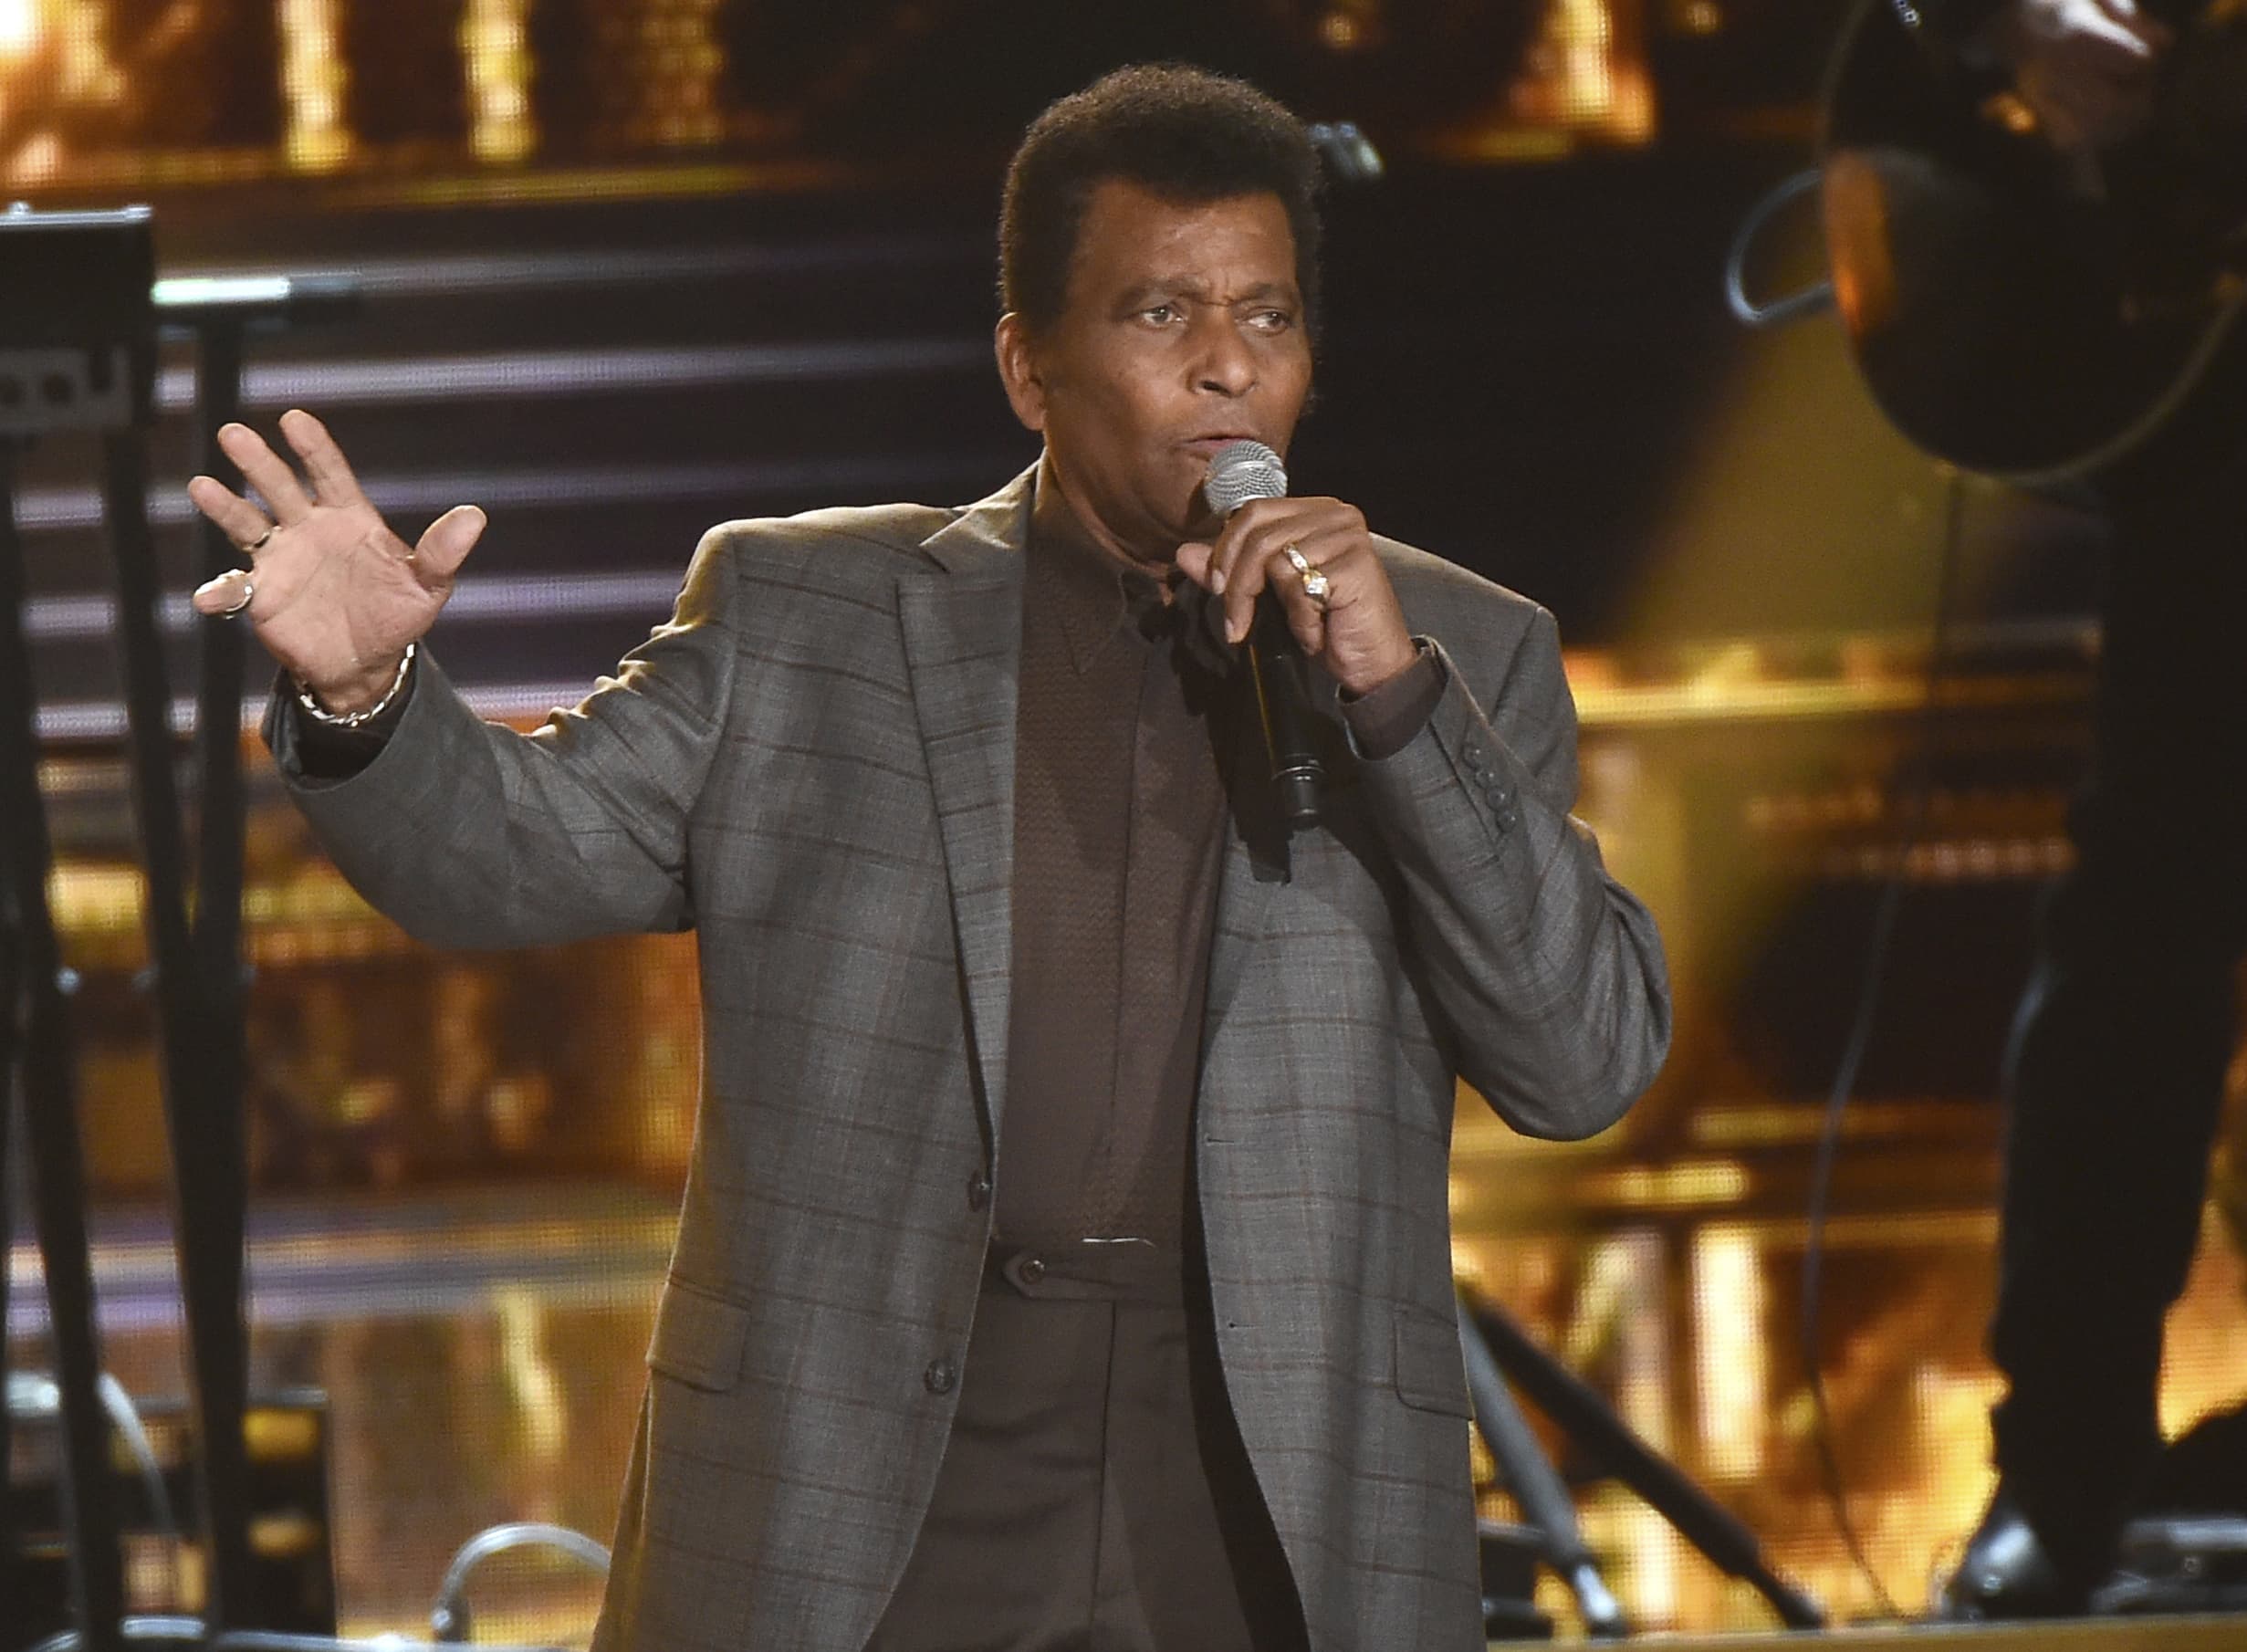 Charley Pride performs &quot;Kiss An Angel Good Morning&quot; at the 50th annual CMA Awards in Nashville, Tenn. on Nov. 3, 2016. Pride will get a lifetime achievement award at the CMA Awards in November. (Charles Sykes/Invision/AP)